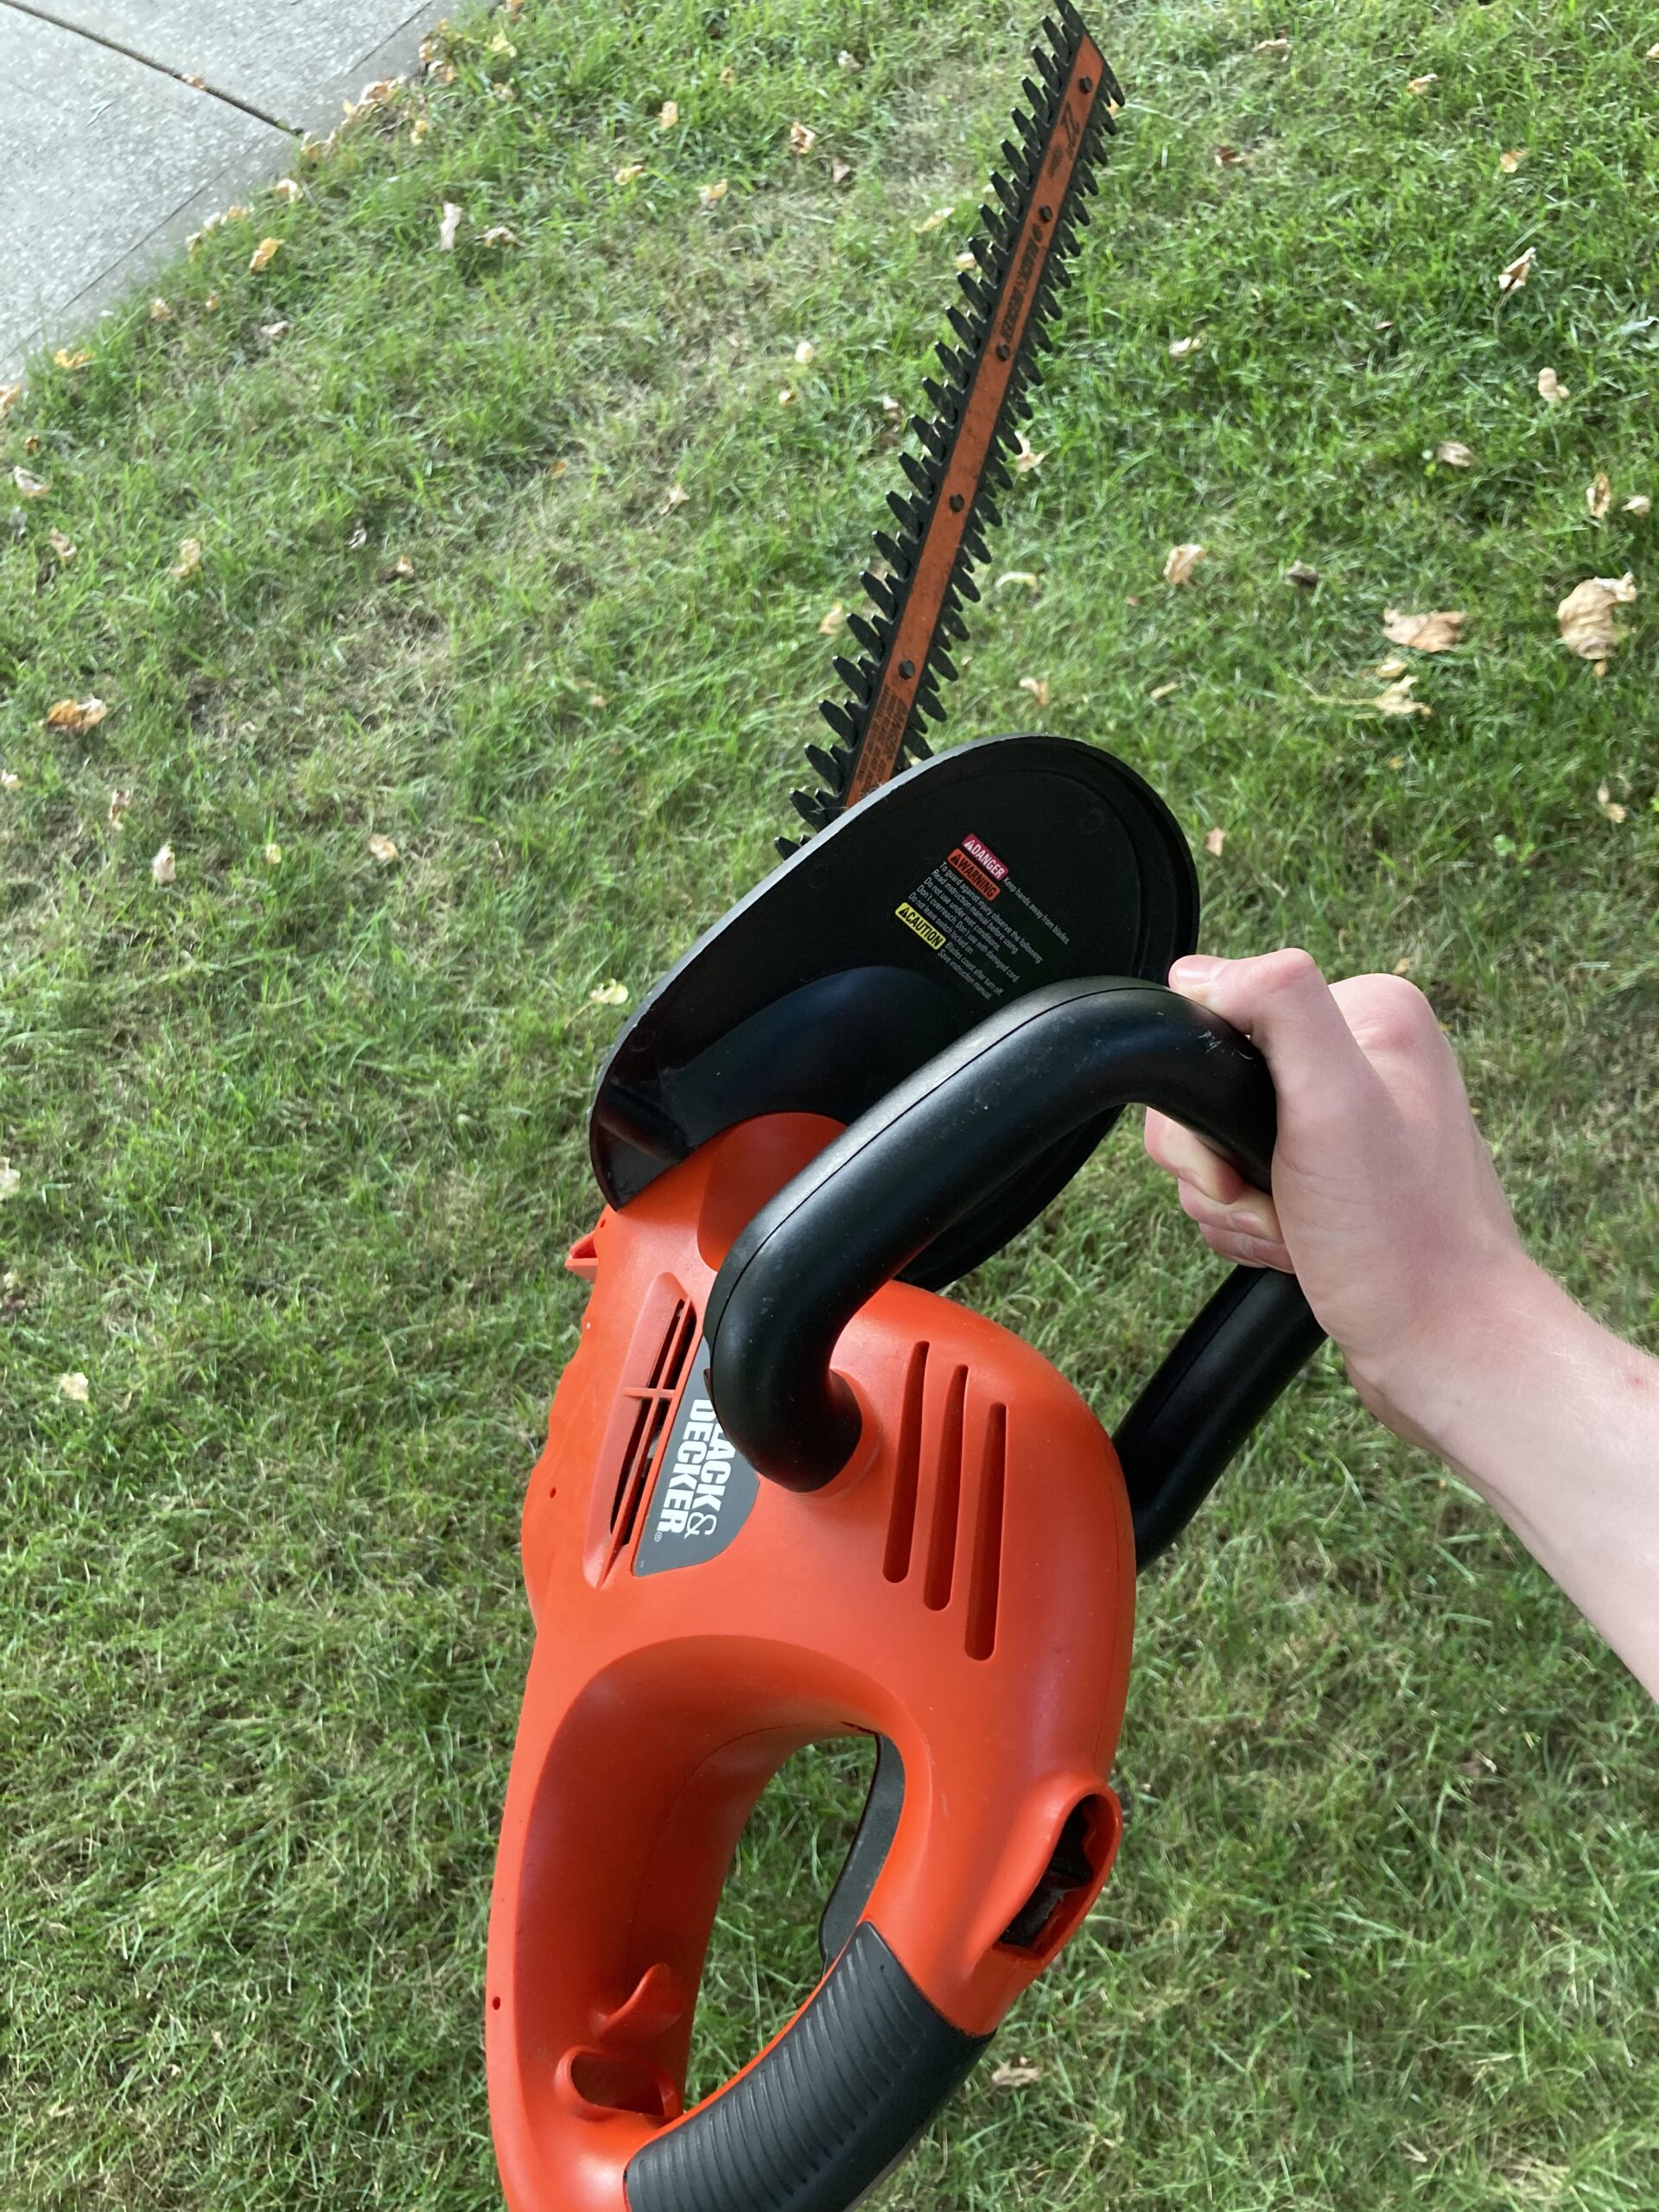 black and decker ht220 hedge trimmer is easy to hold